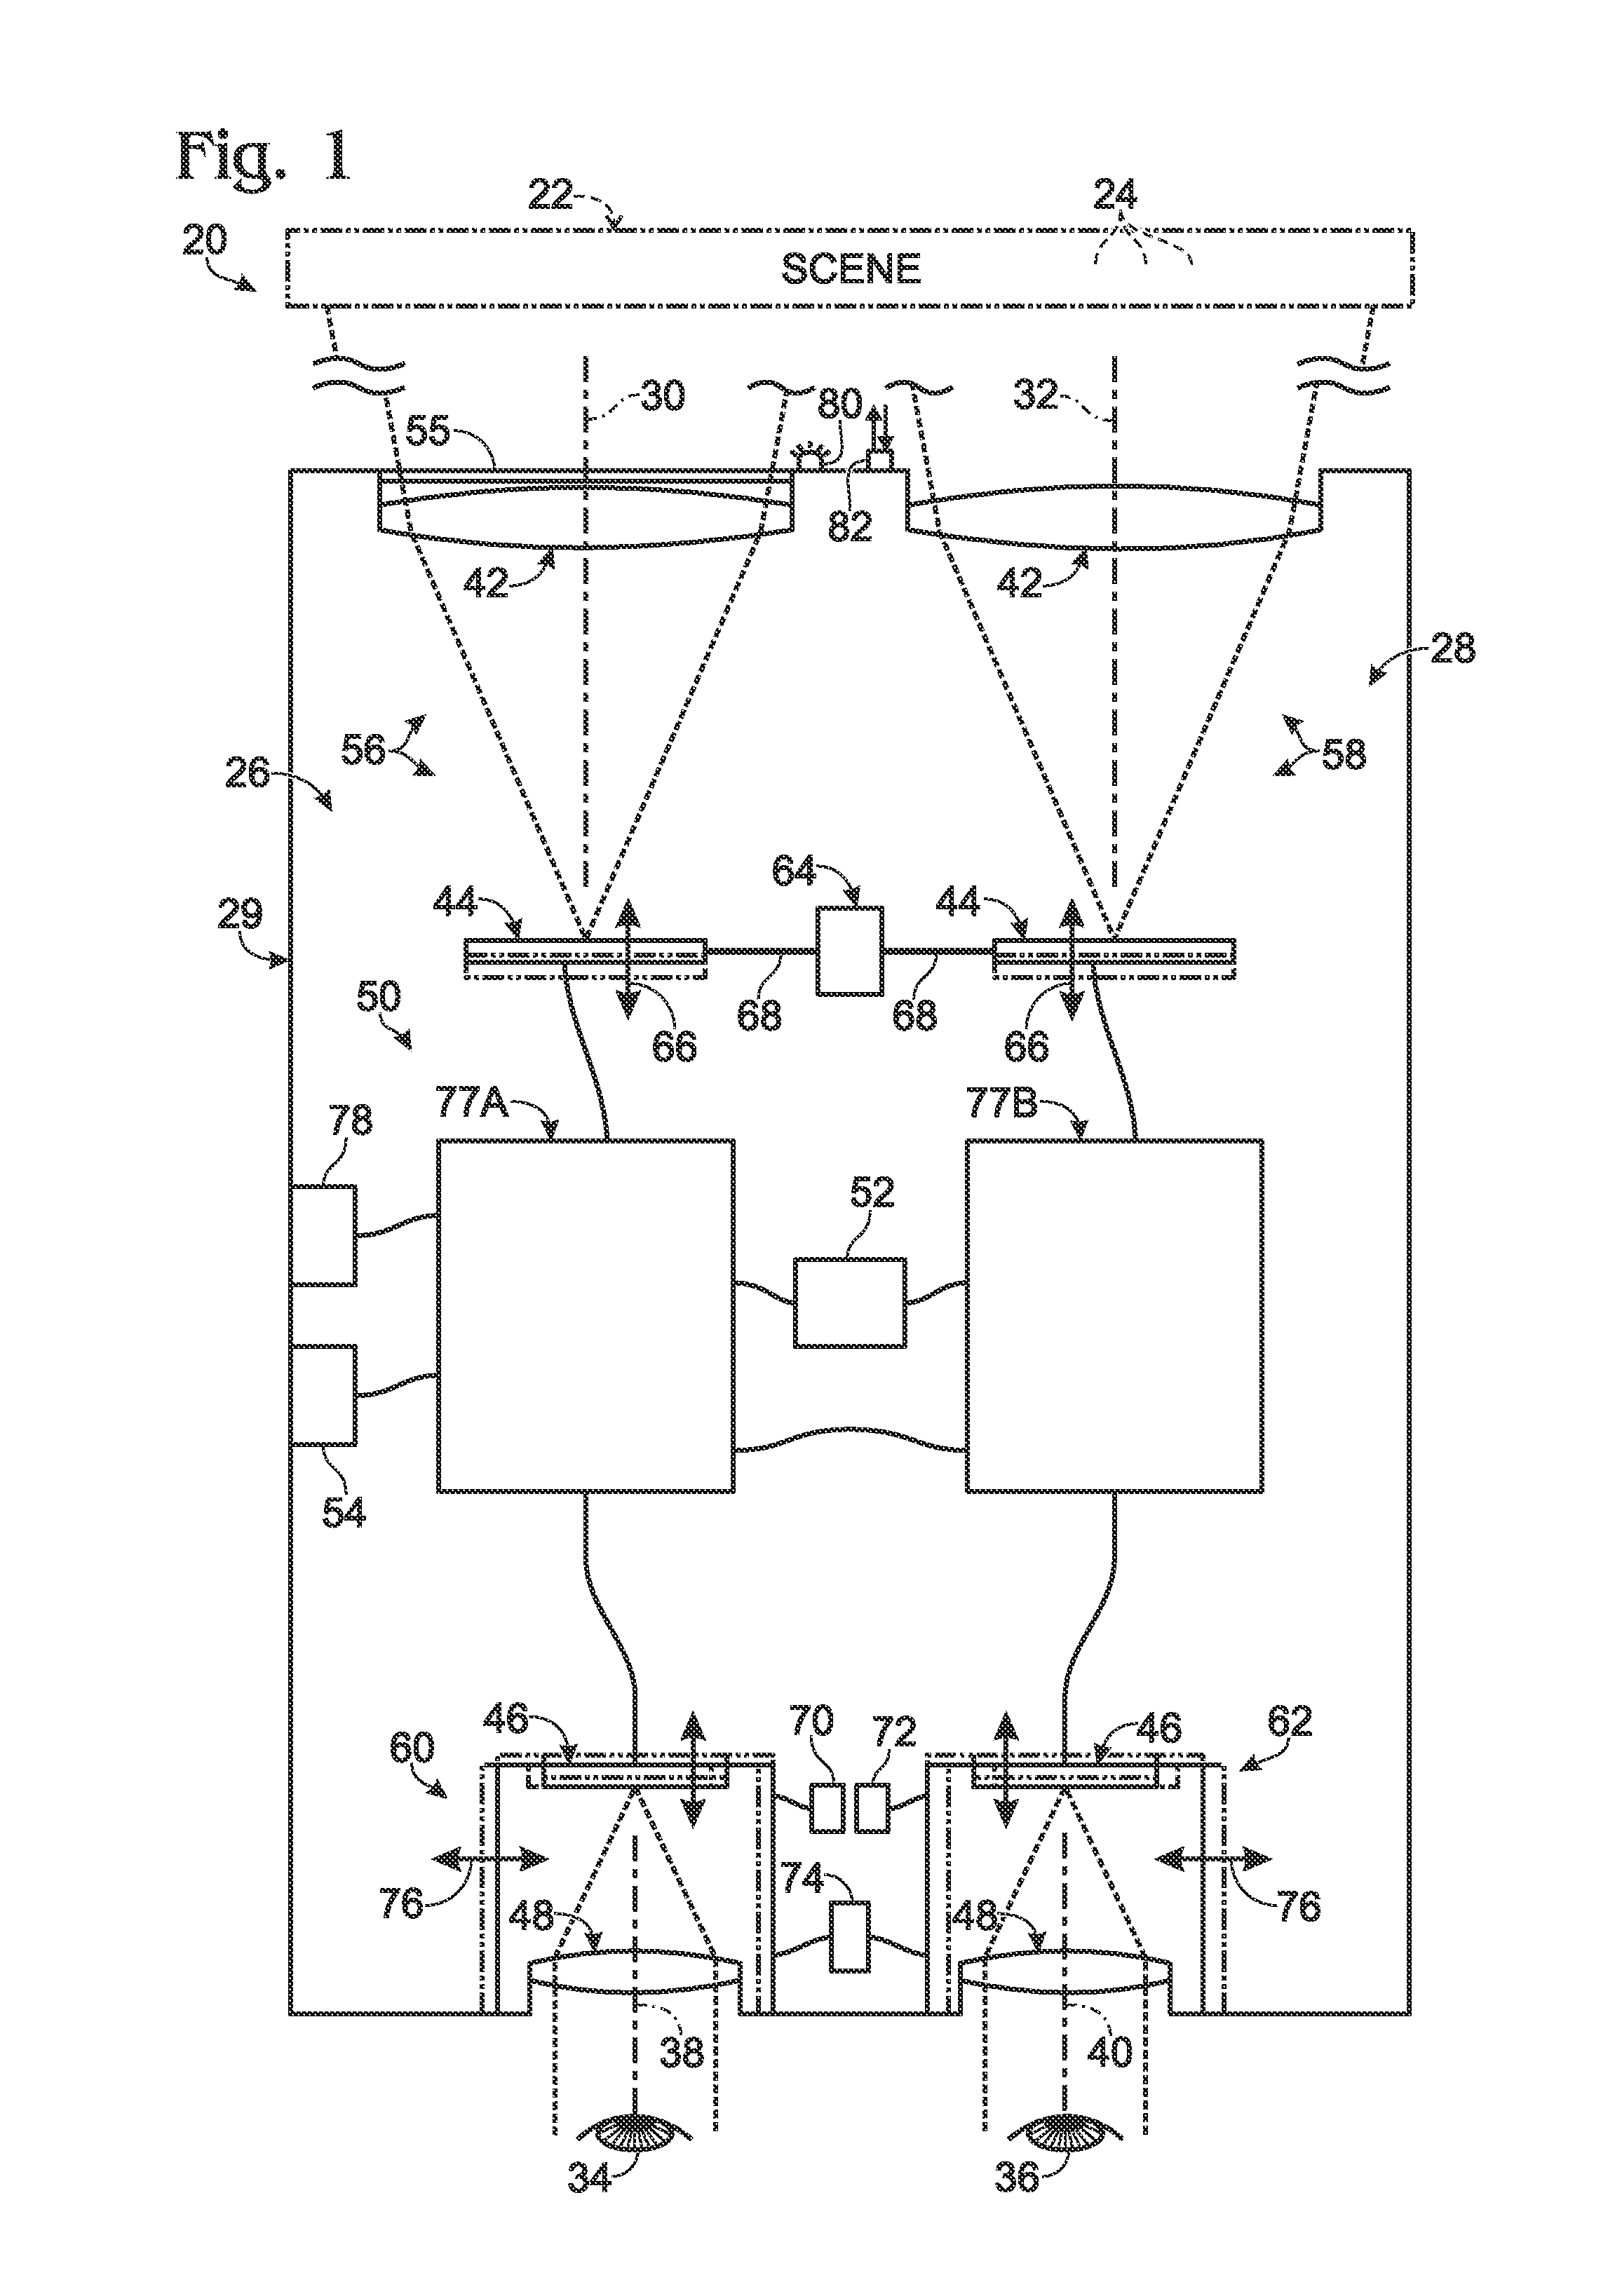 Infrared binocular system with dual diopter adjustment